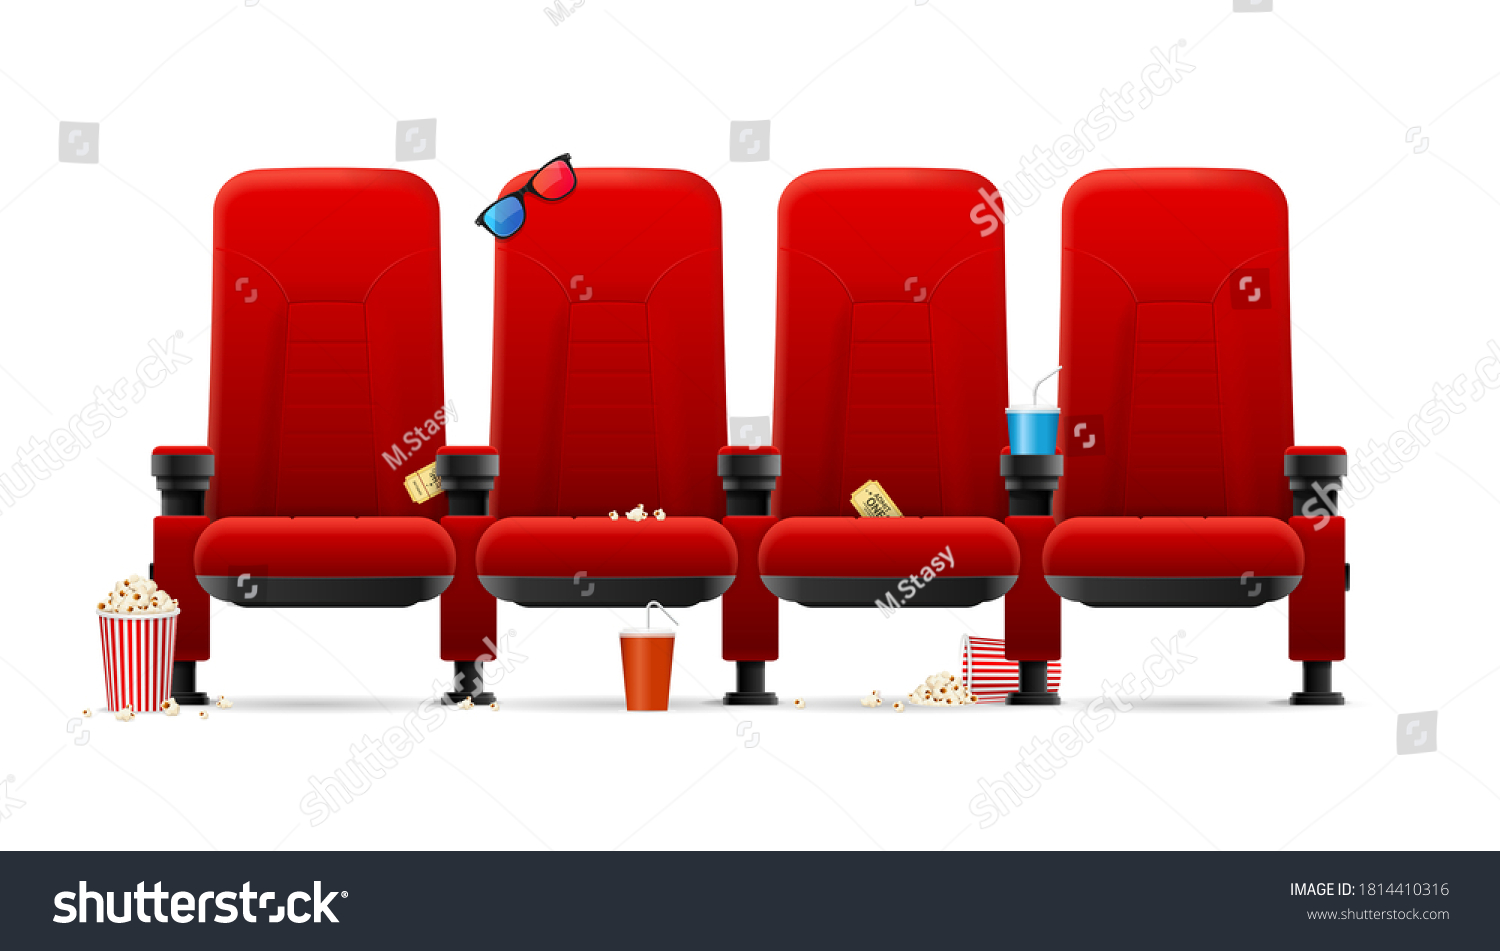 SVG of Realistic Detailed 3d Red Cinema Seats with Different Trash after Movie Screening. Vector illustration of Chairs svg